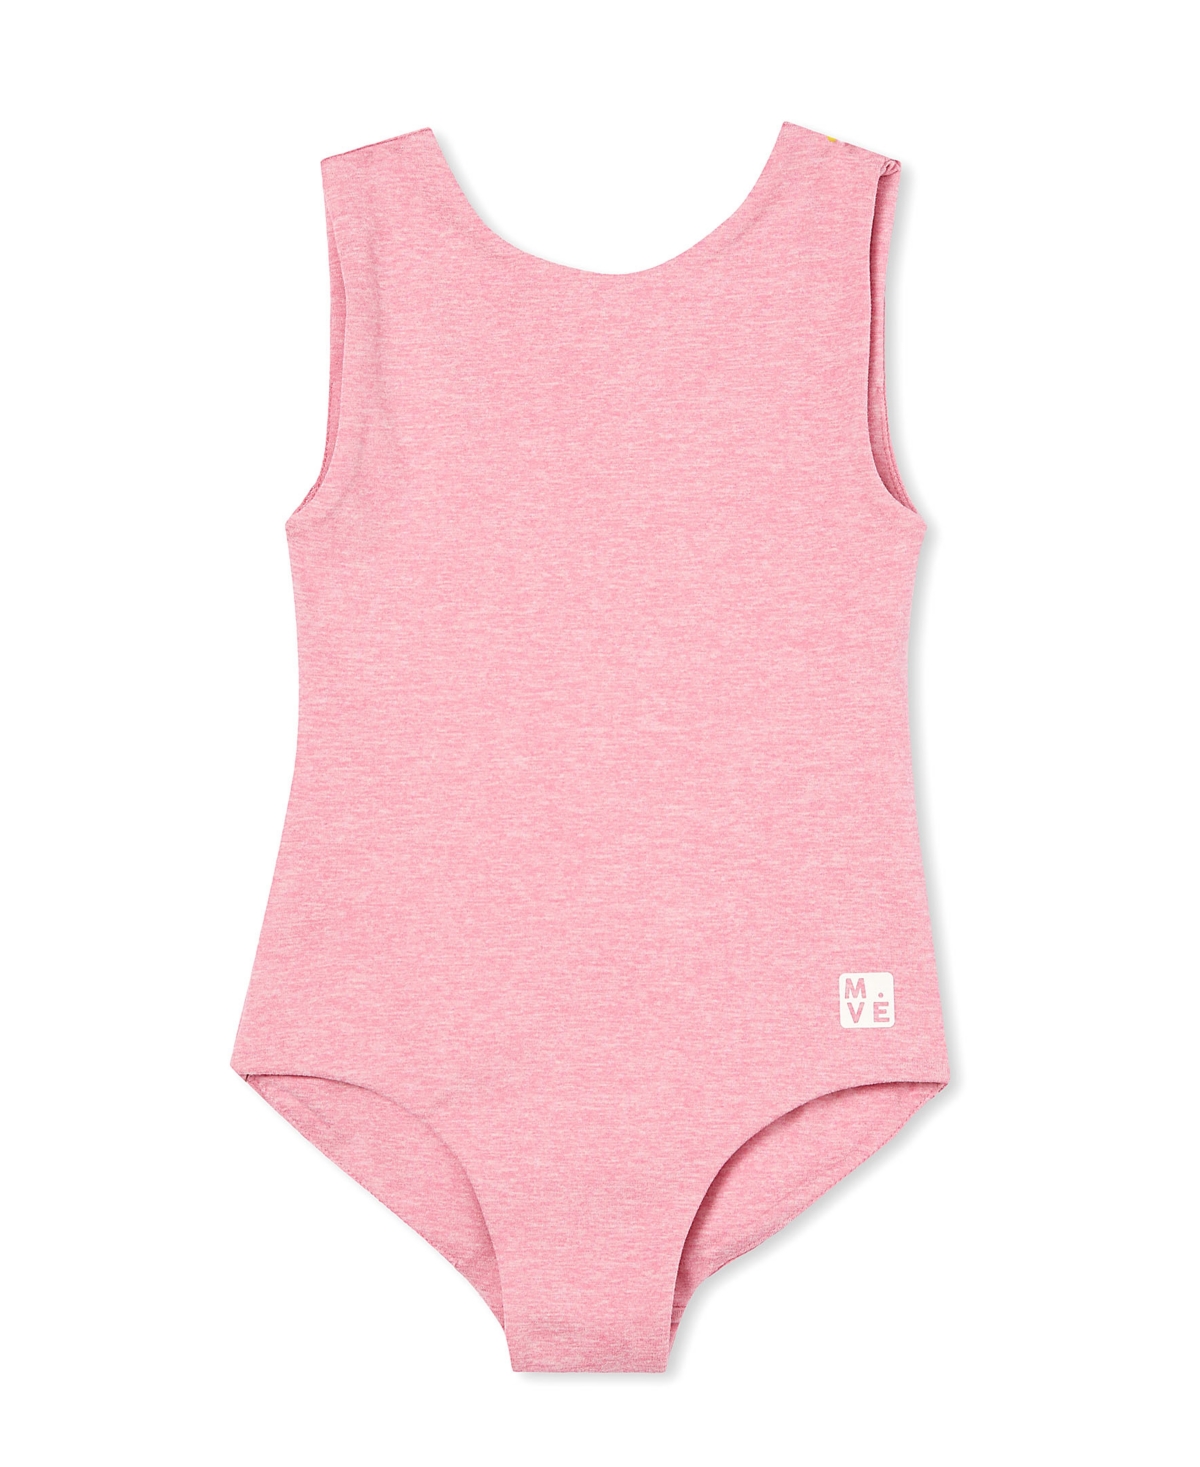 COTTON ON TODDLER GIRLS THE SCOOP BACK LEOTARD SWIMSUIT